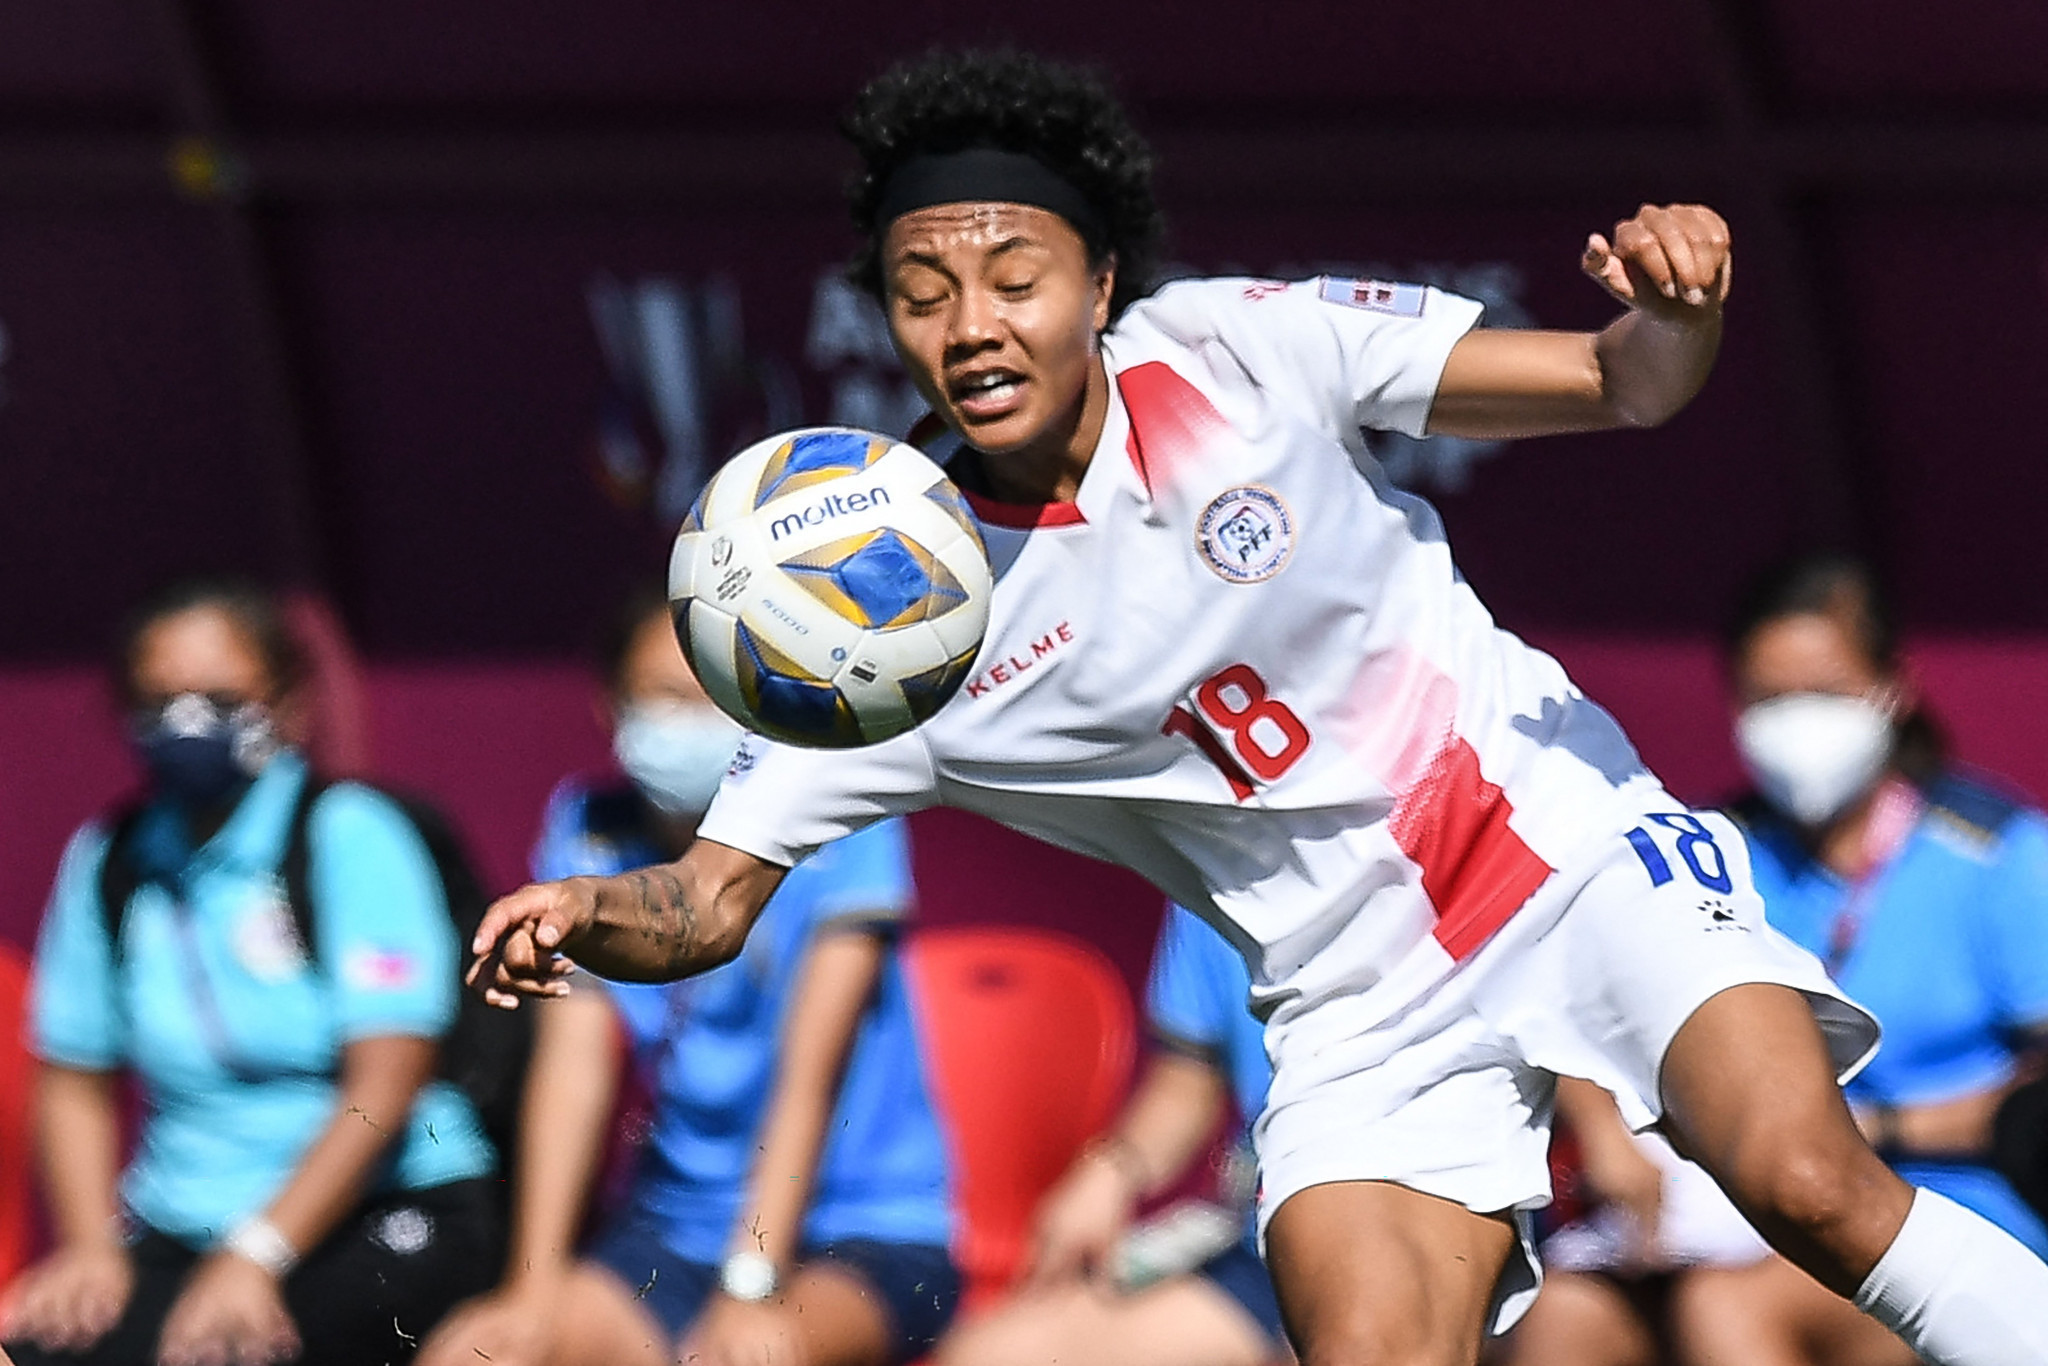 Sarina Bolden scored the only goal of the match for Philippines over Australia's under-23 team ©Getty Images